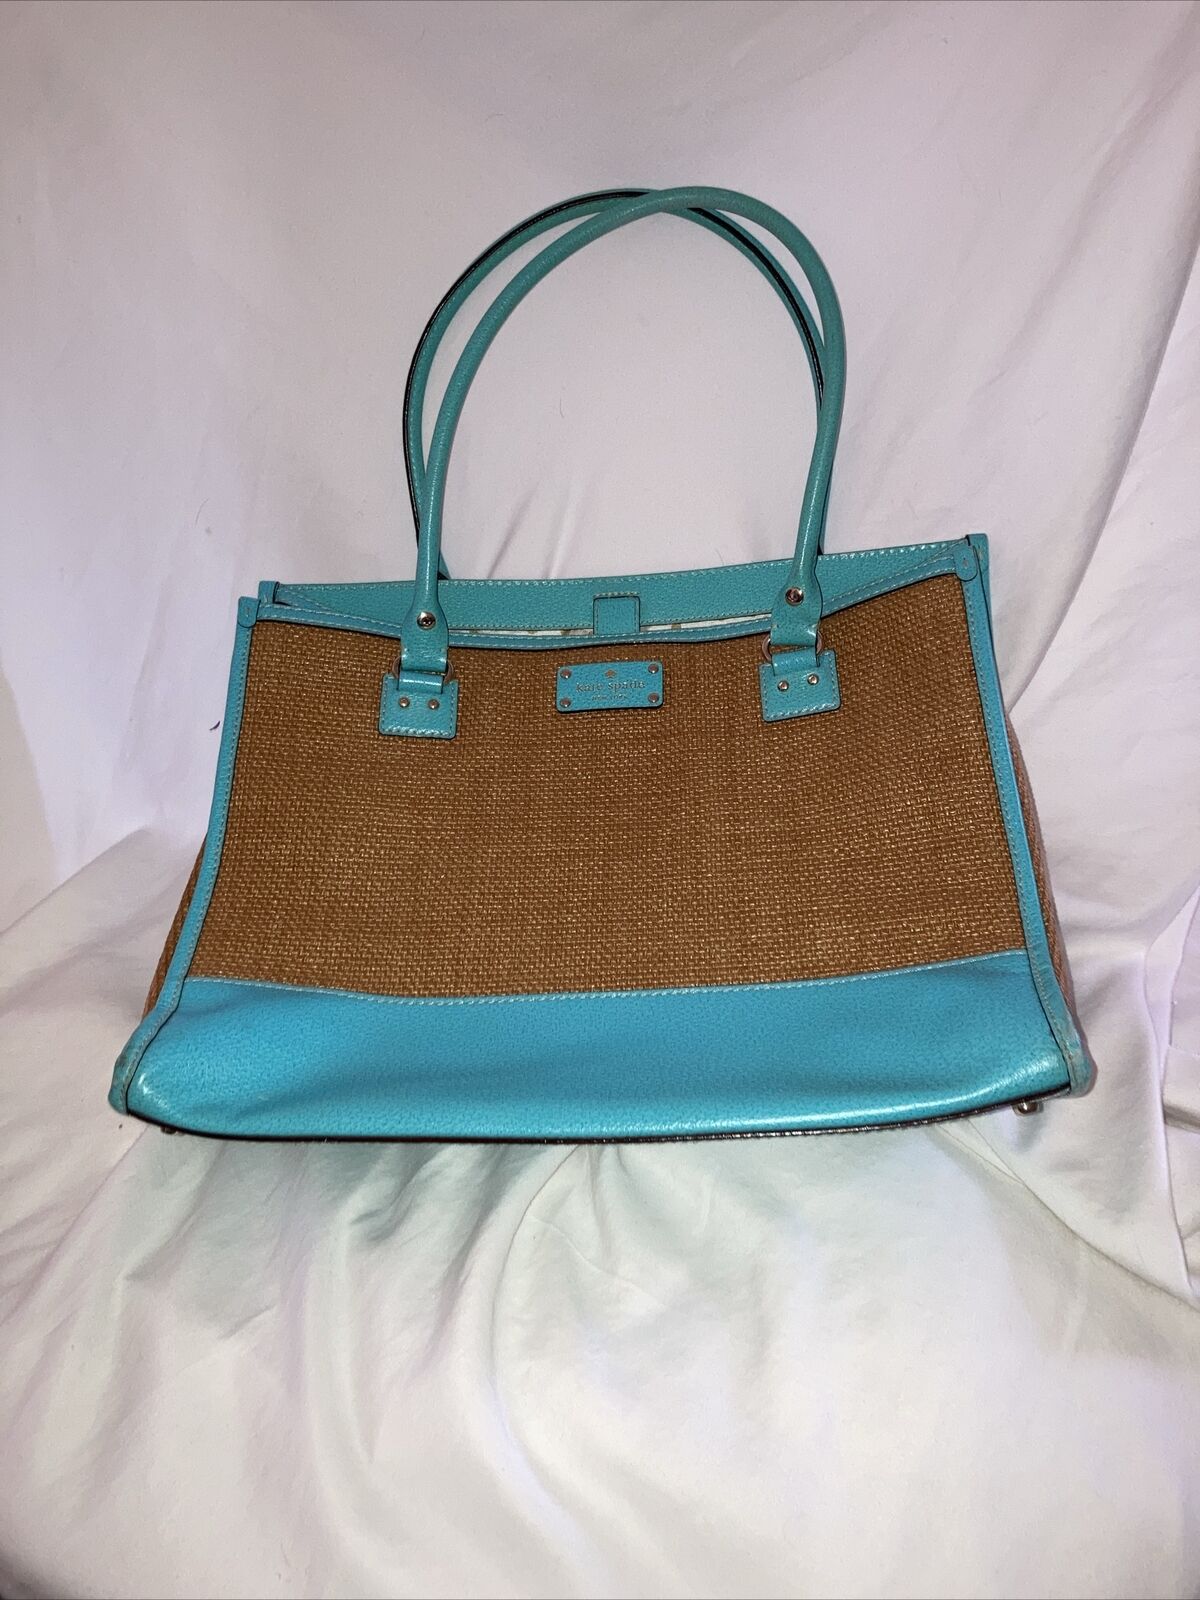 Kate Spade large wicker leather tote bag - image 3